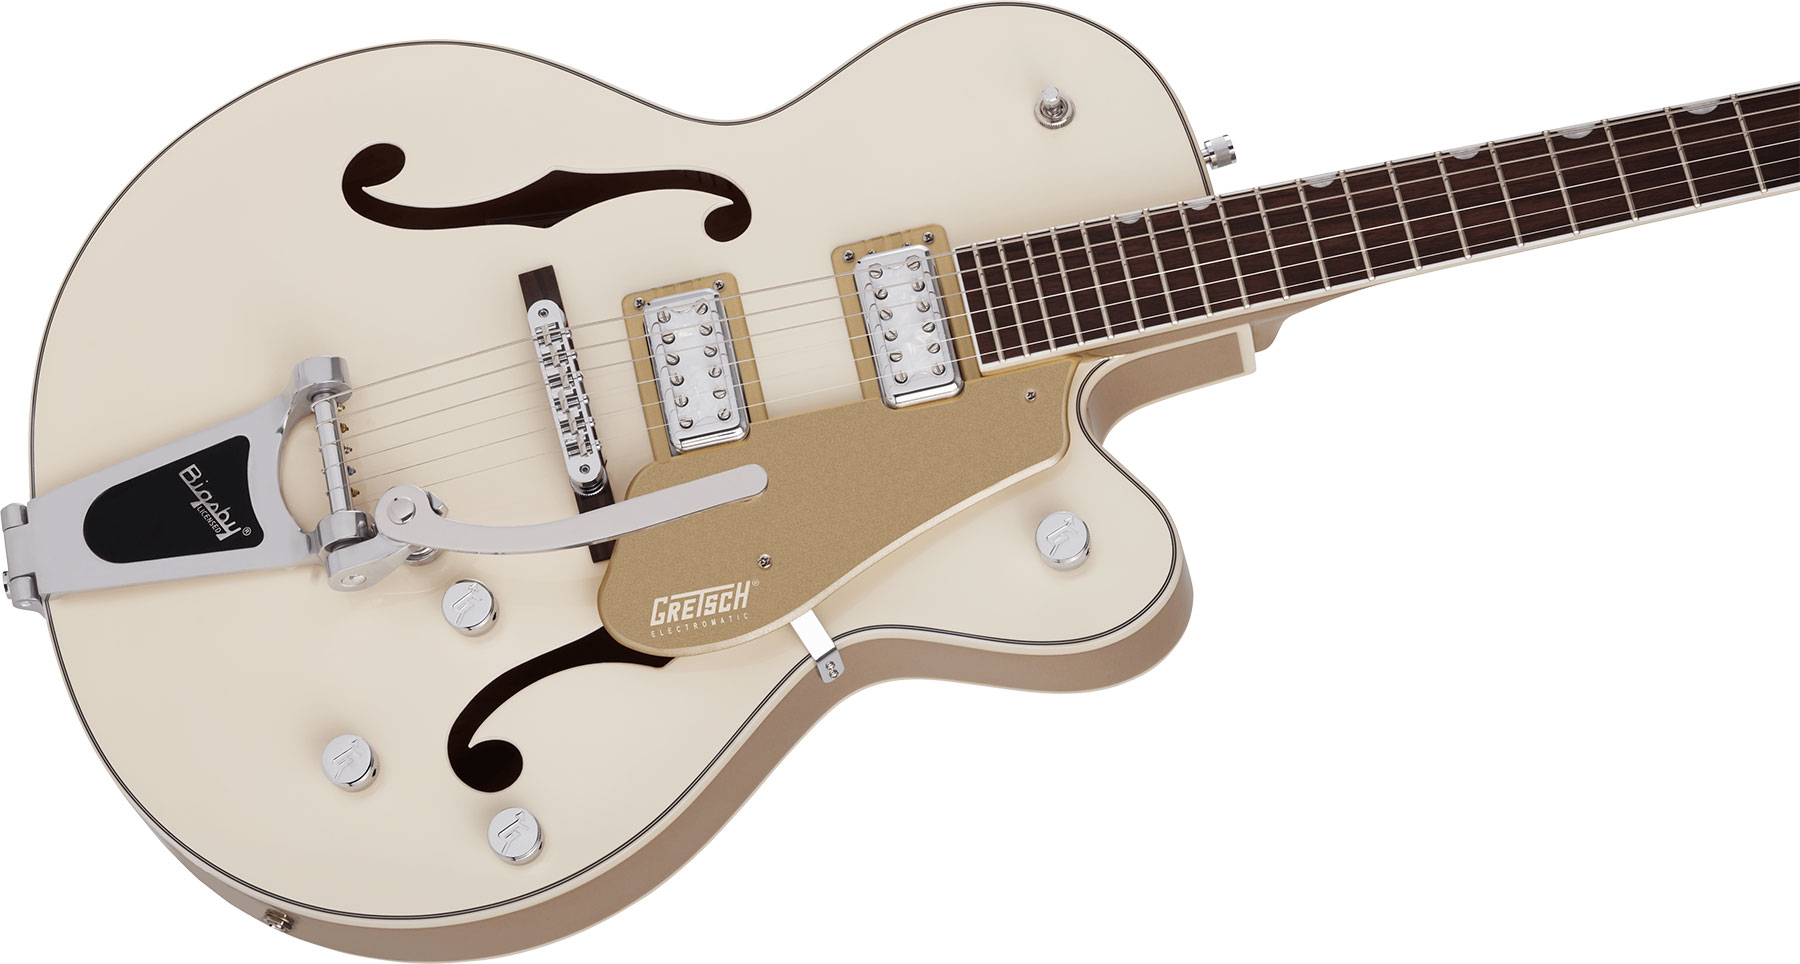 Gretsch G5410t Tri-five Electromatic Hollow Hh Bigsby Rw - Two-tone Vintage White/casino Gold - Semi-hollow electric guitar - Variation 2